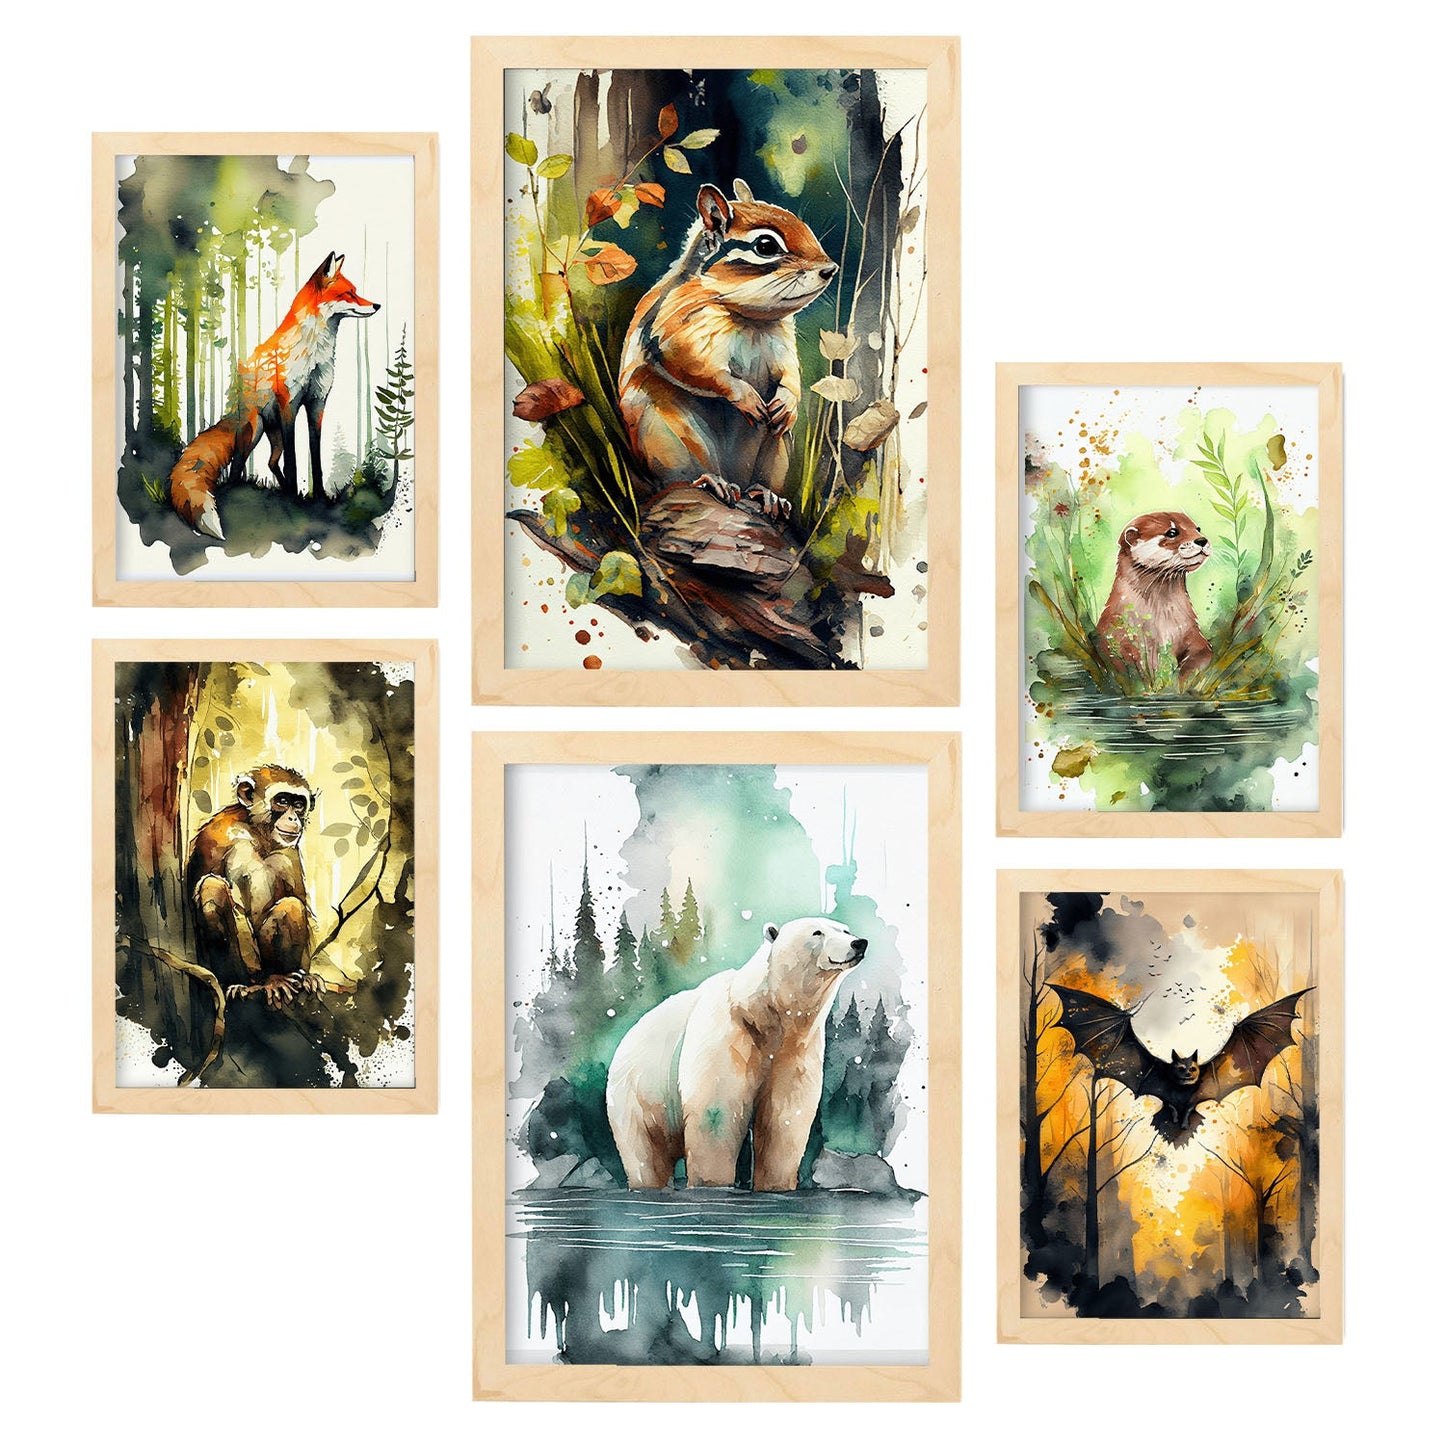 Nacnic Watercolor Animal Set_6. Aesthetic Wall Art Prints for Bedroom or Living Room Design.